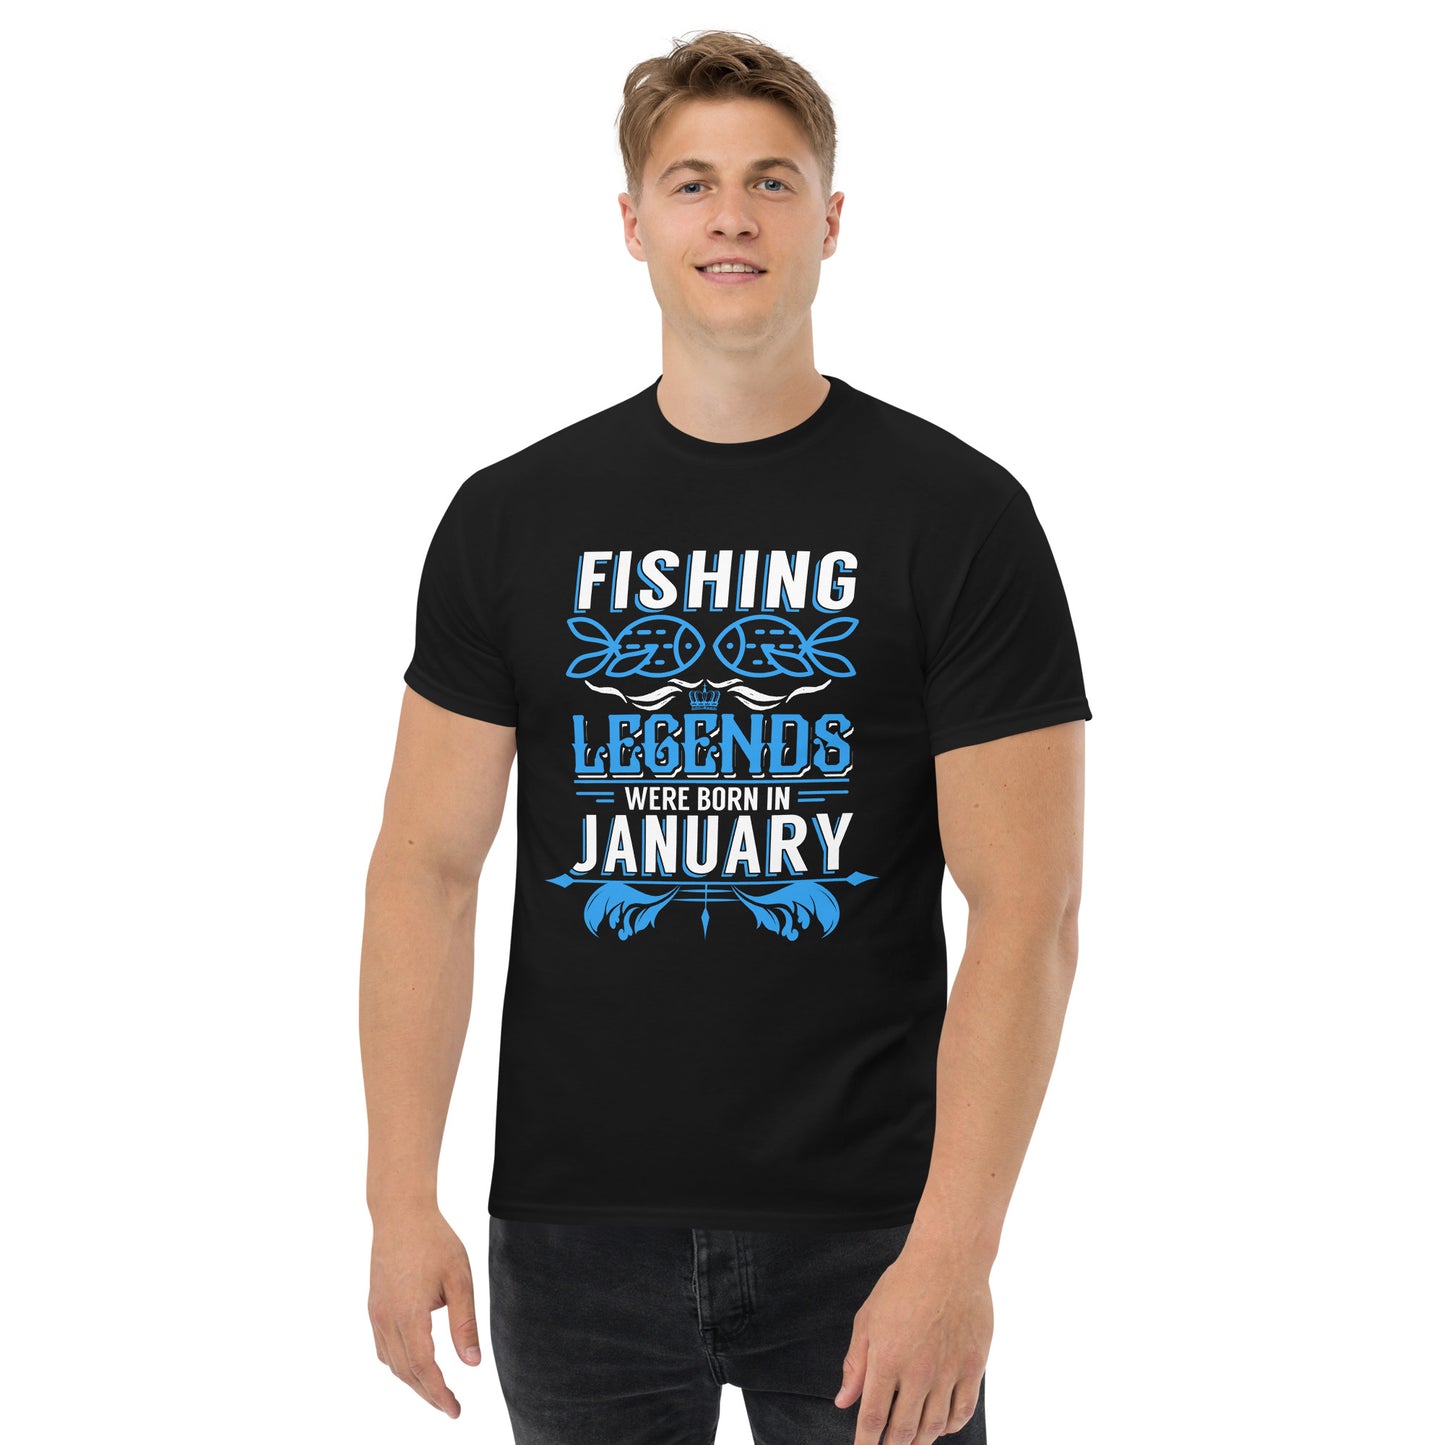 Fishing Legends Were Born In January T-Shirt